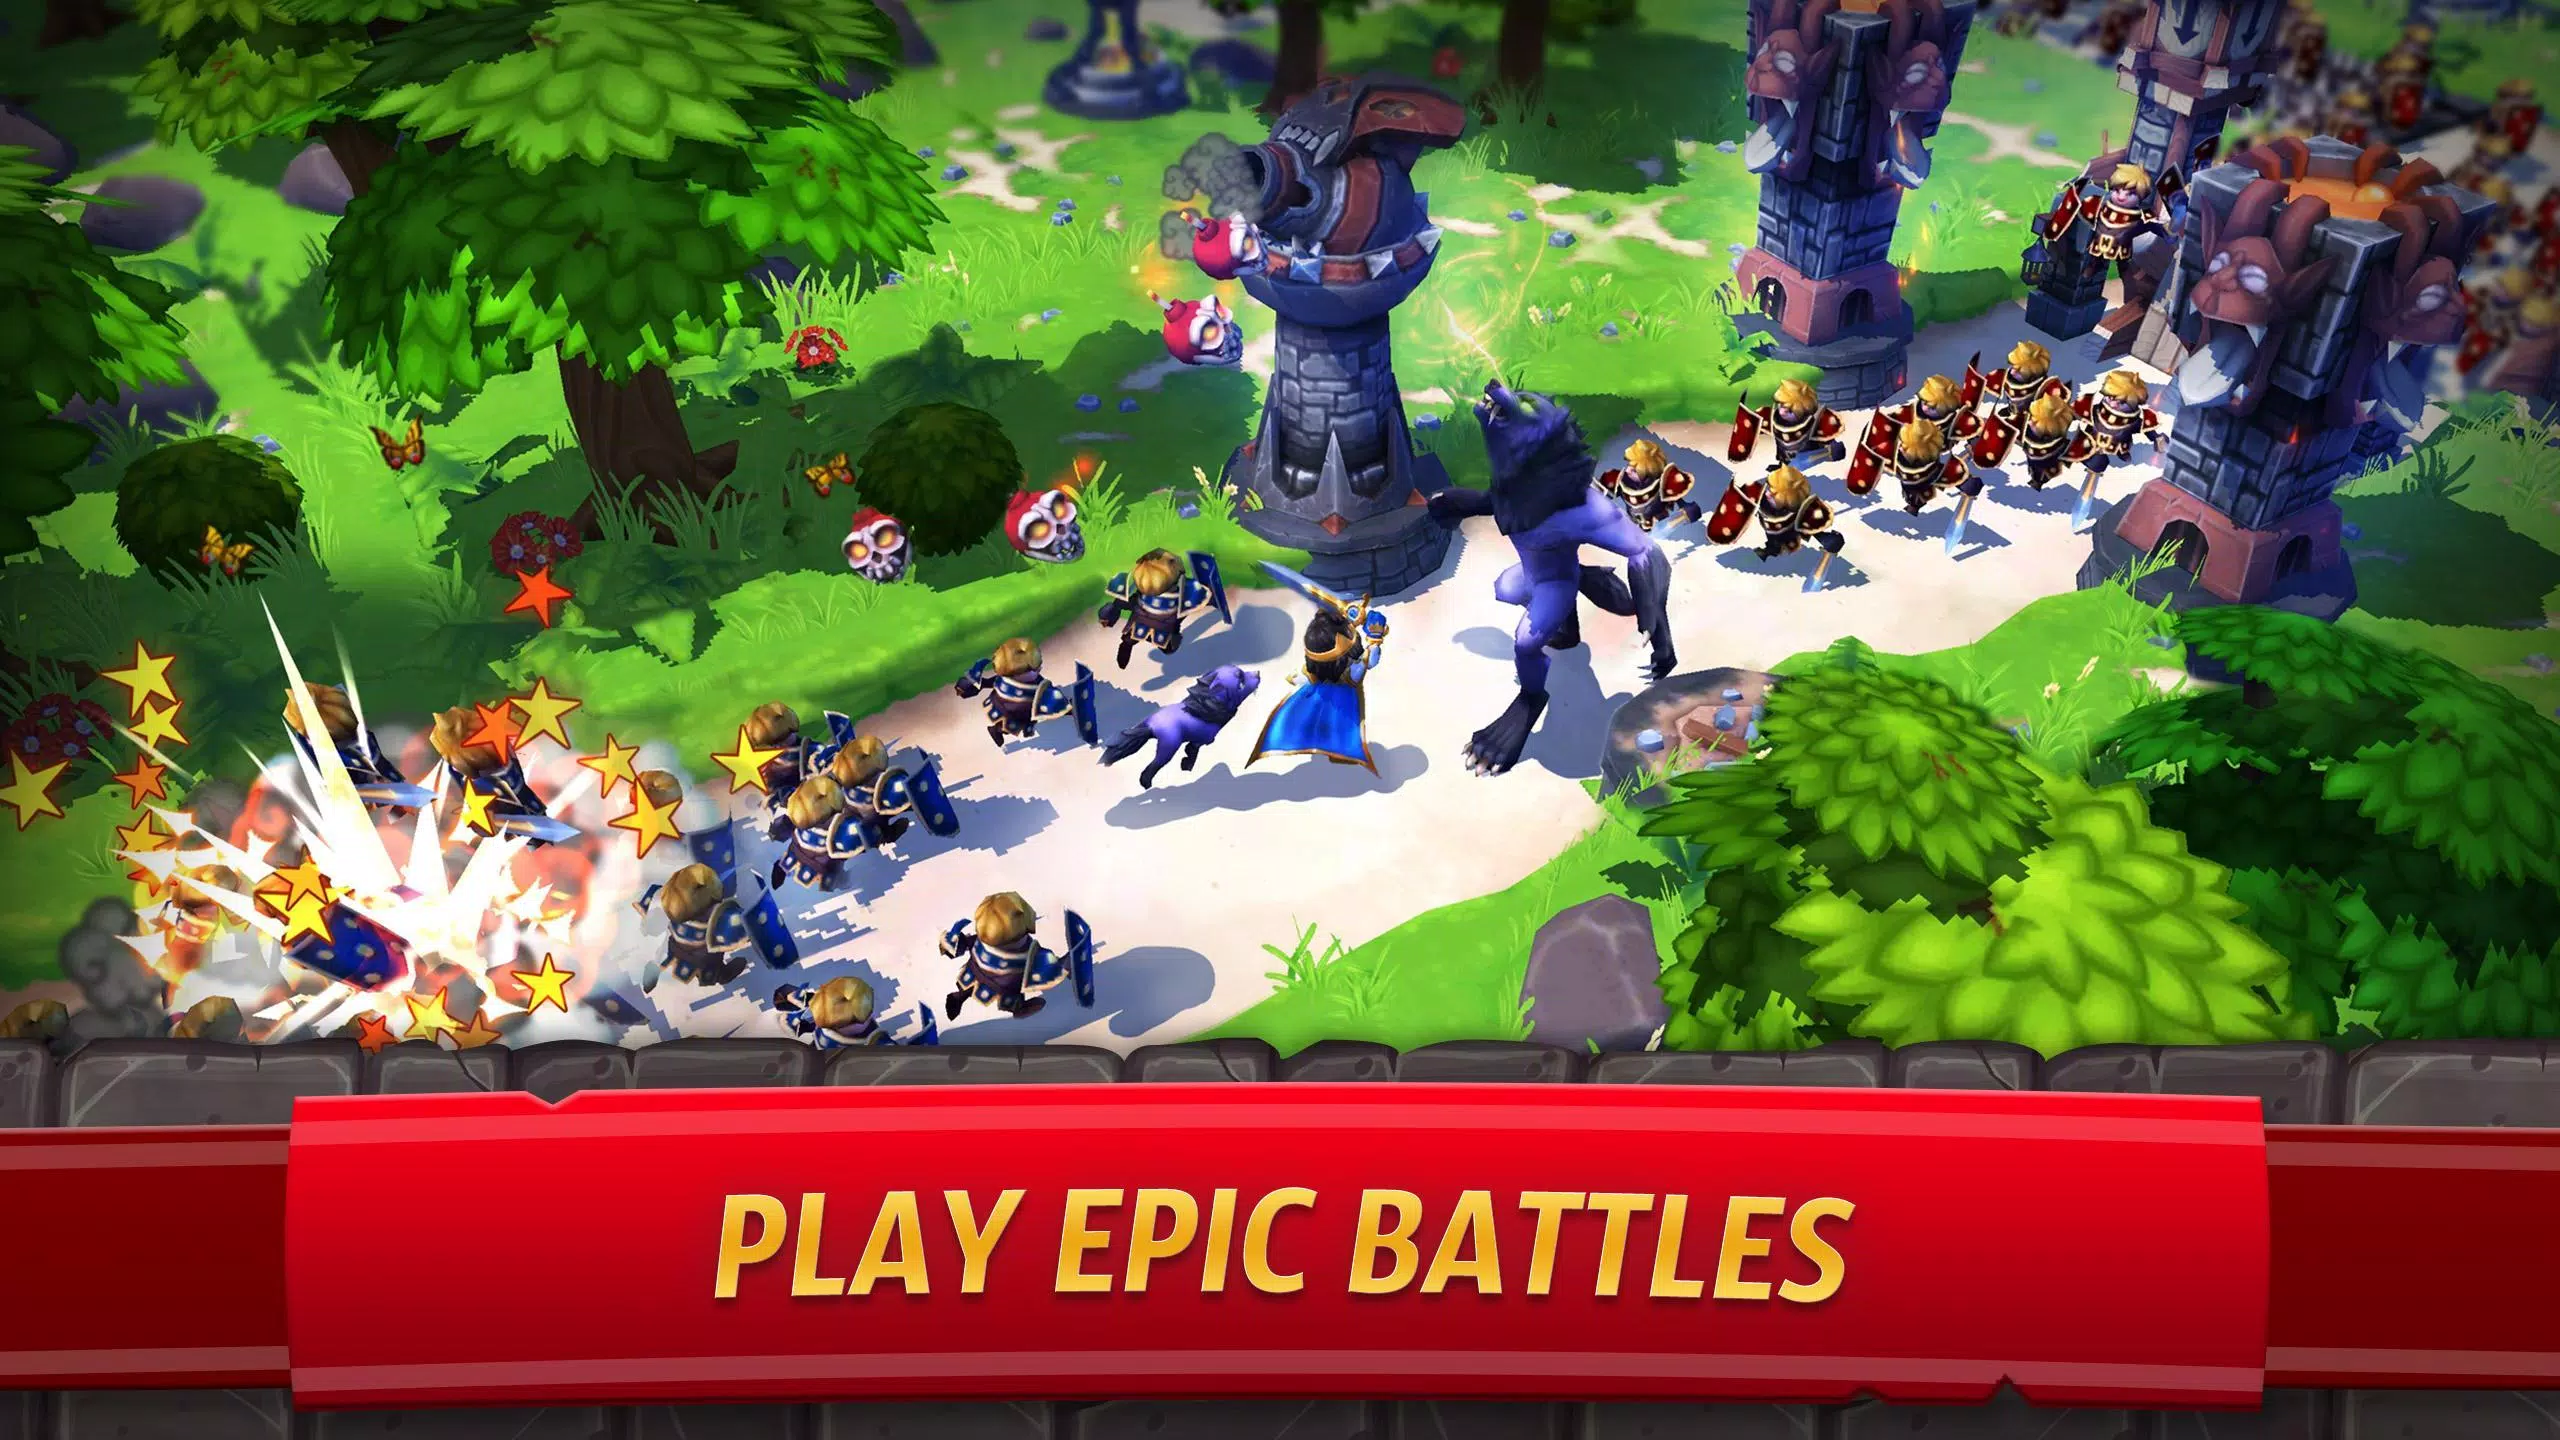 Download Pokemon Tower Defence 9.0.0 APK For Android